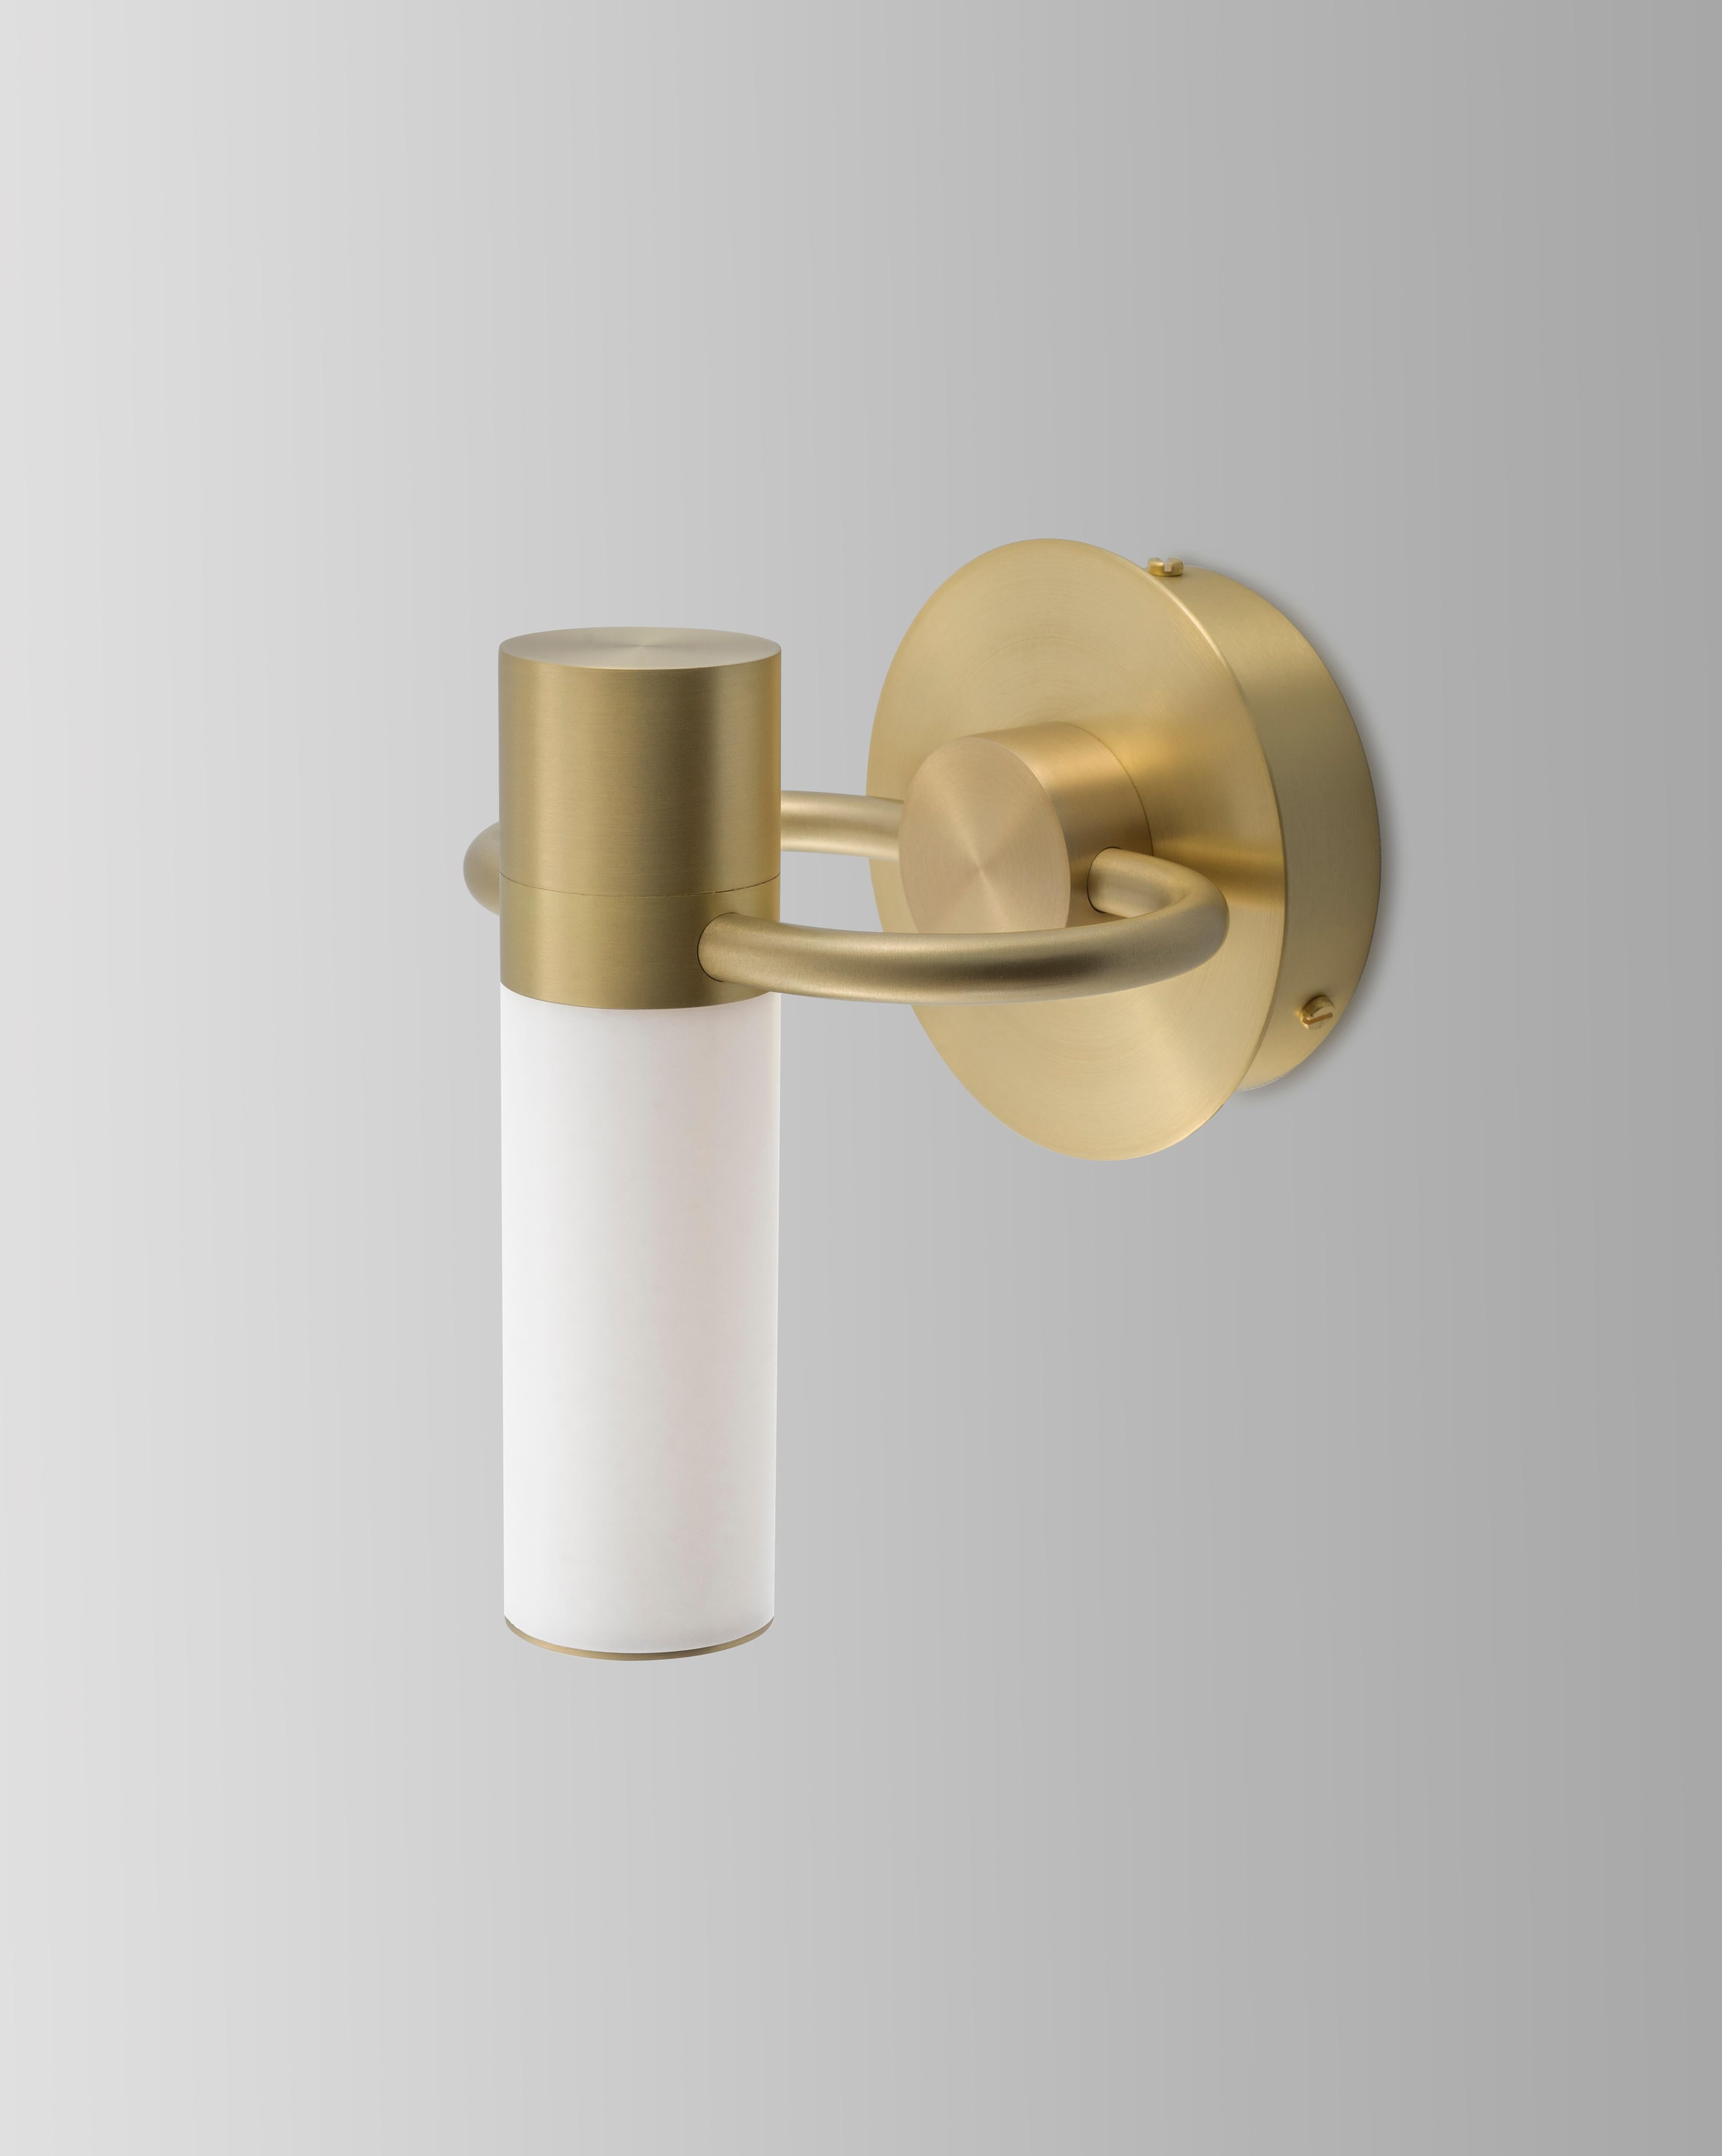 IP Storm satin brass wall light by Emilie Cathelineau
Dimensions: D15.5 x W15.5 X H19 cm
Materials: Solid brass, Satin Brass, White Polycarbonate.
Others finishes are available.

All our lamps can be wired according to each country. If sold to